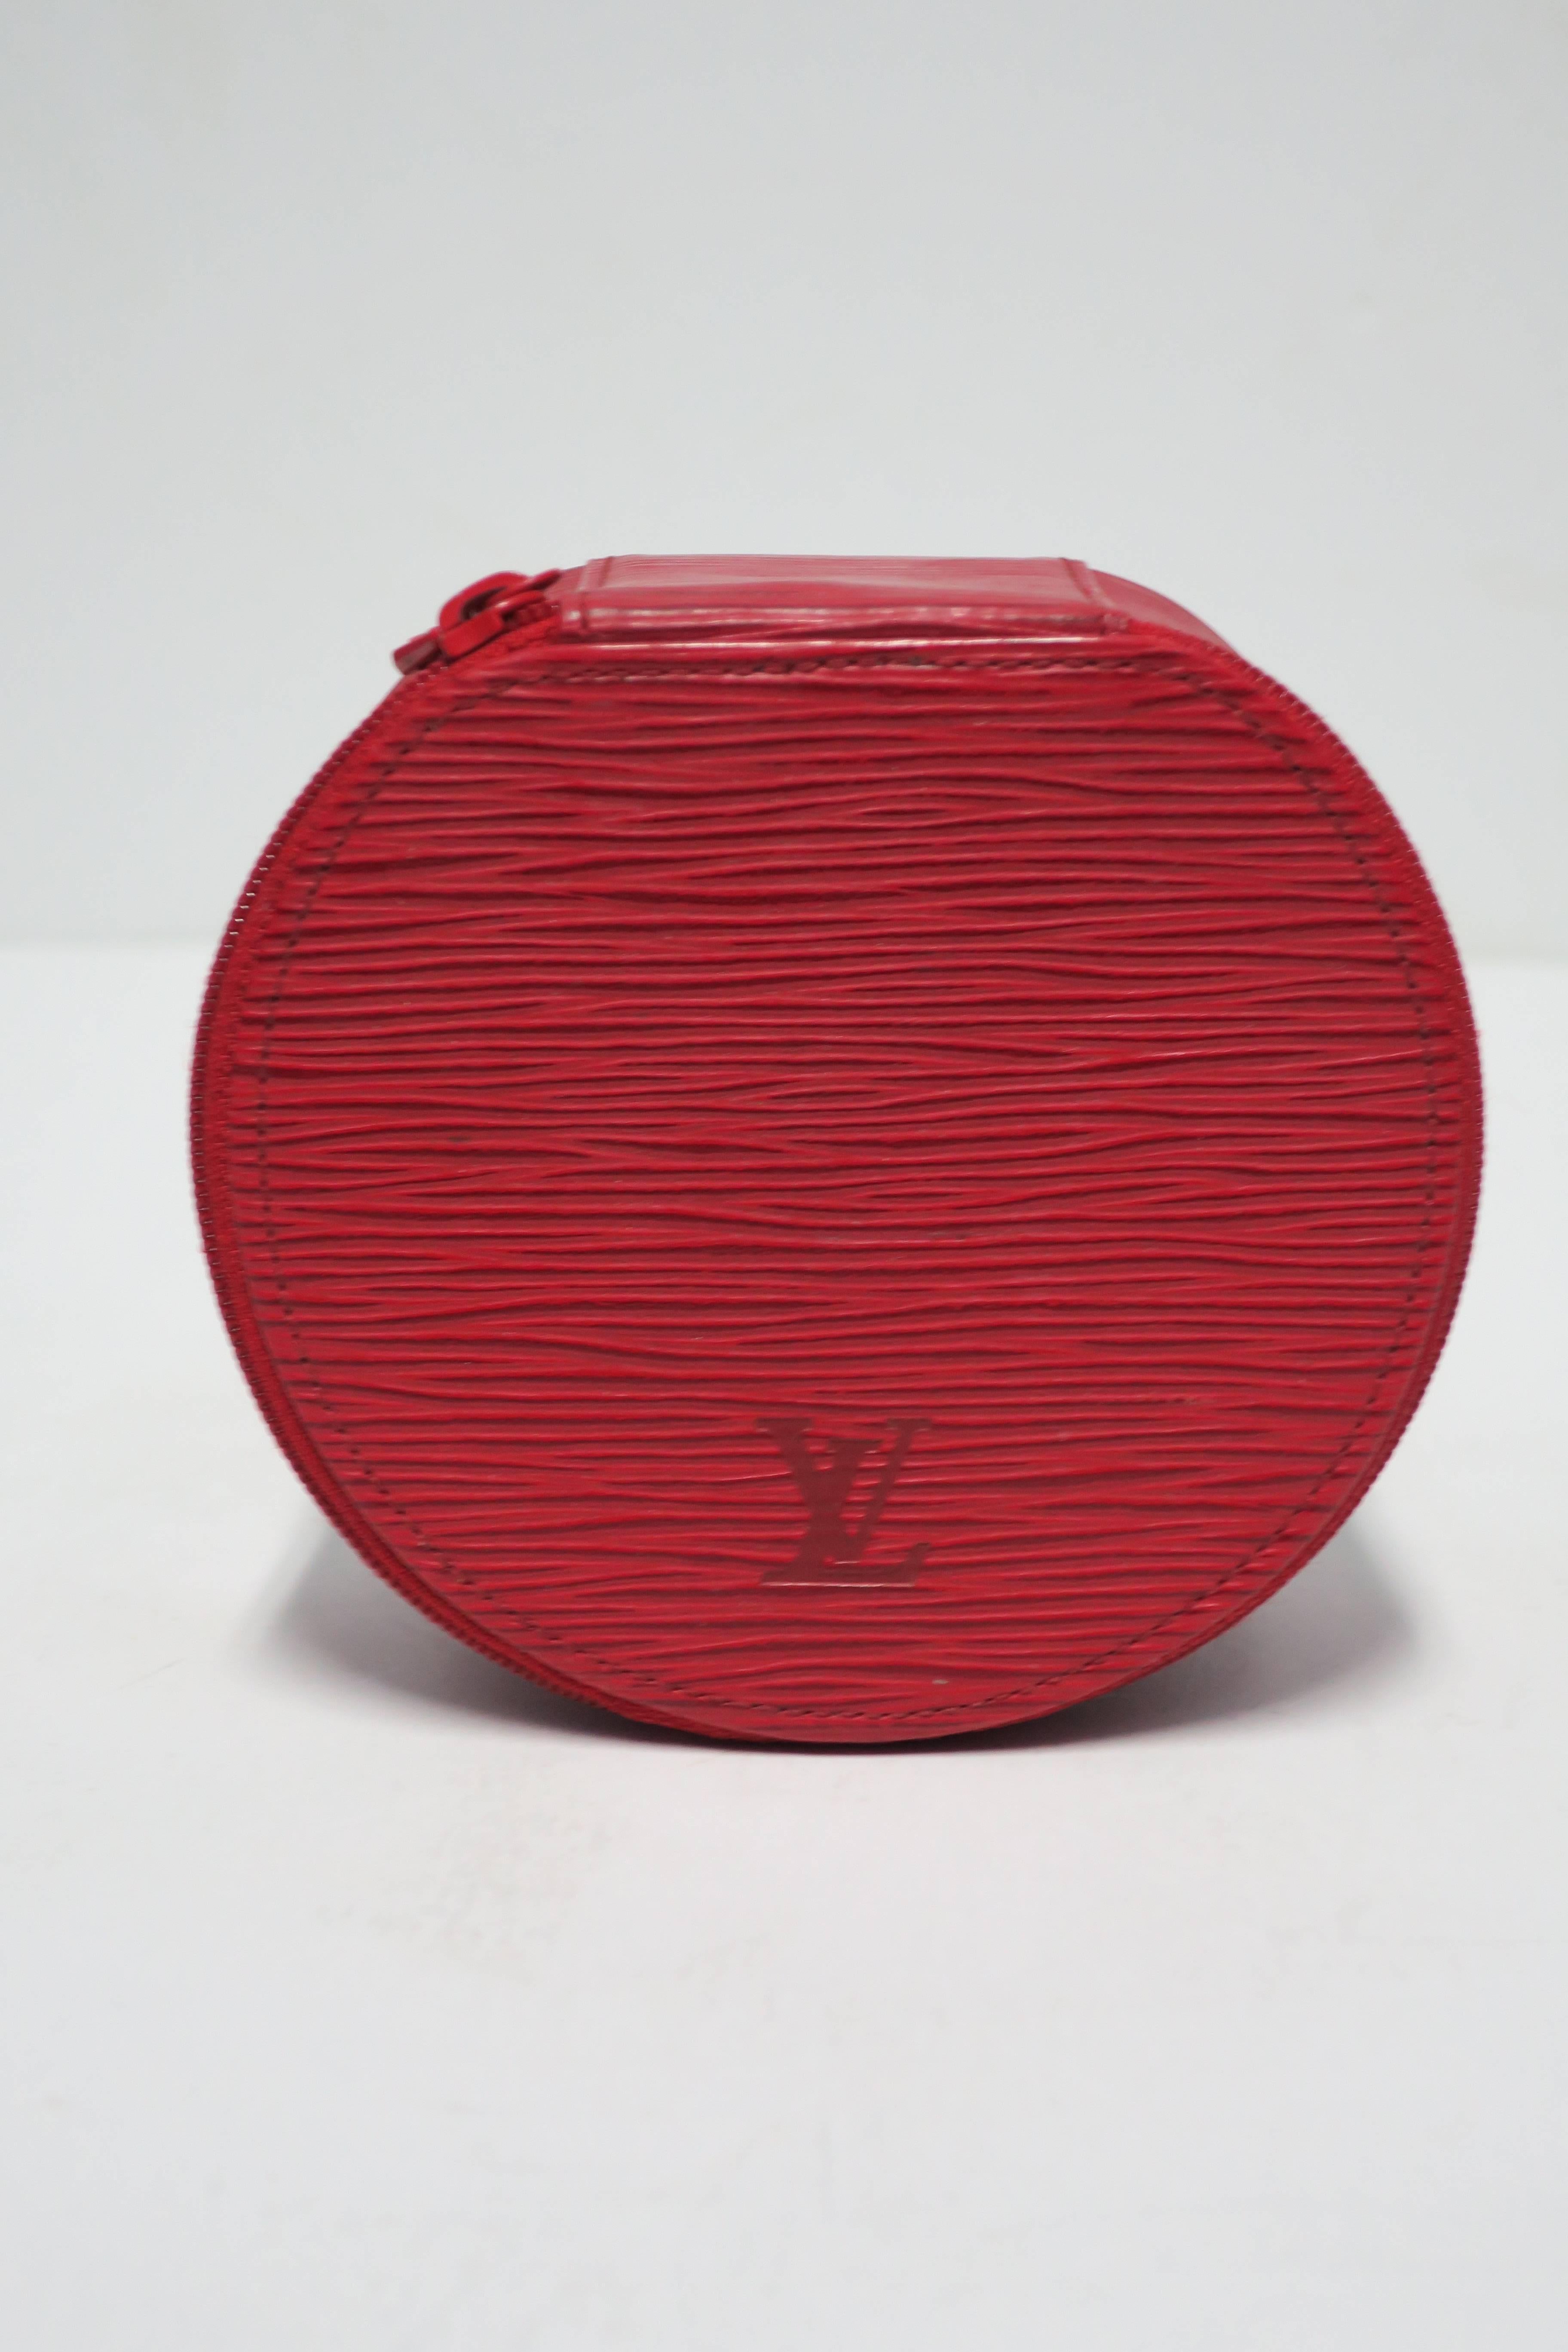 An authentic beautiful red LV Louis Vuitton epi leather travel jewelry box or case. Internal 'detachable ring' used to section off jewelry pieces as show in images. Multiple LV or Louis Vuitton marking's on outside and inside of box as show in